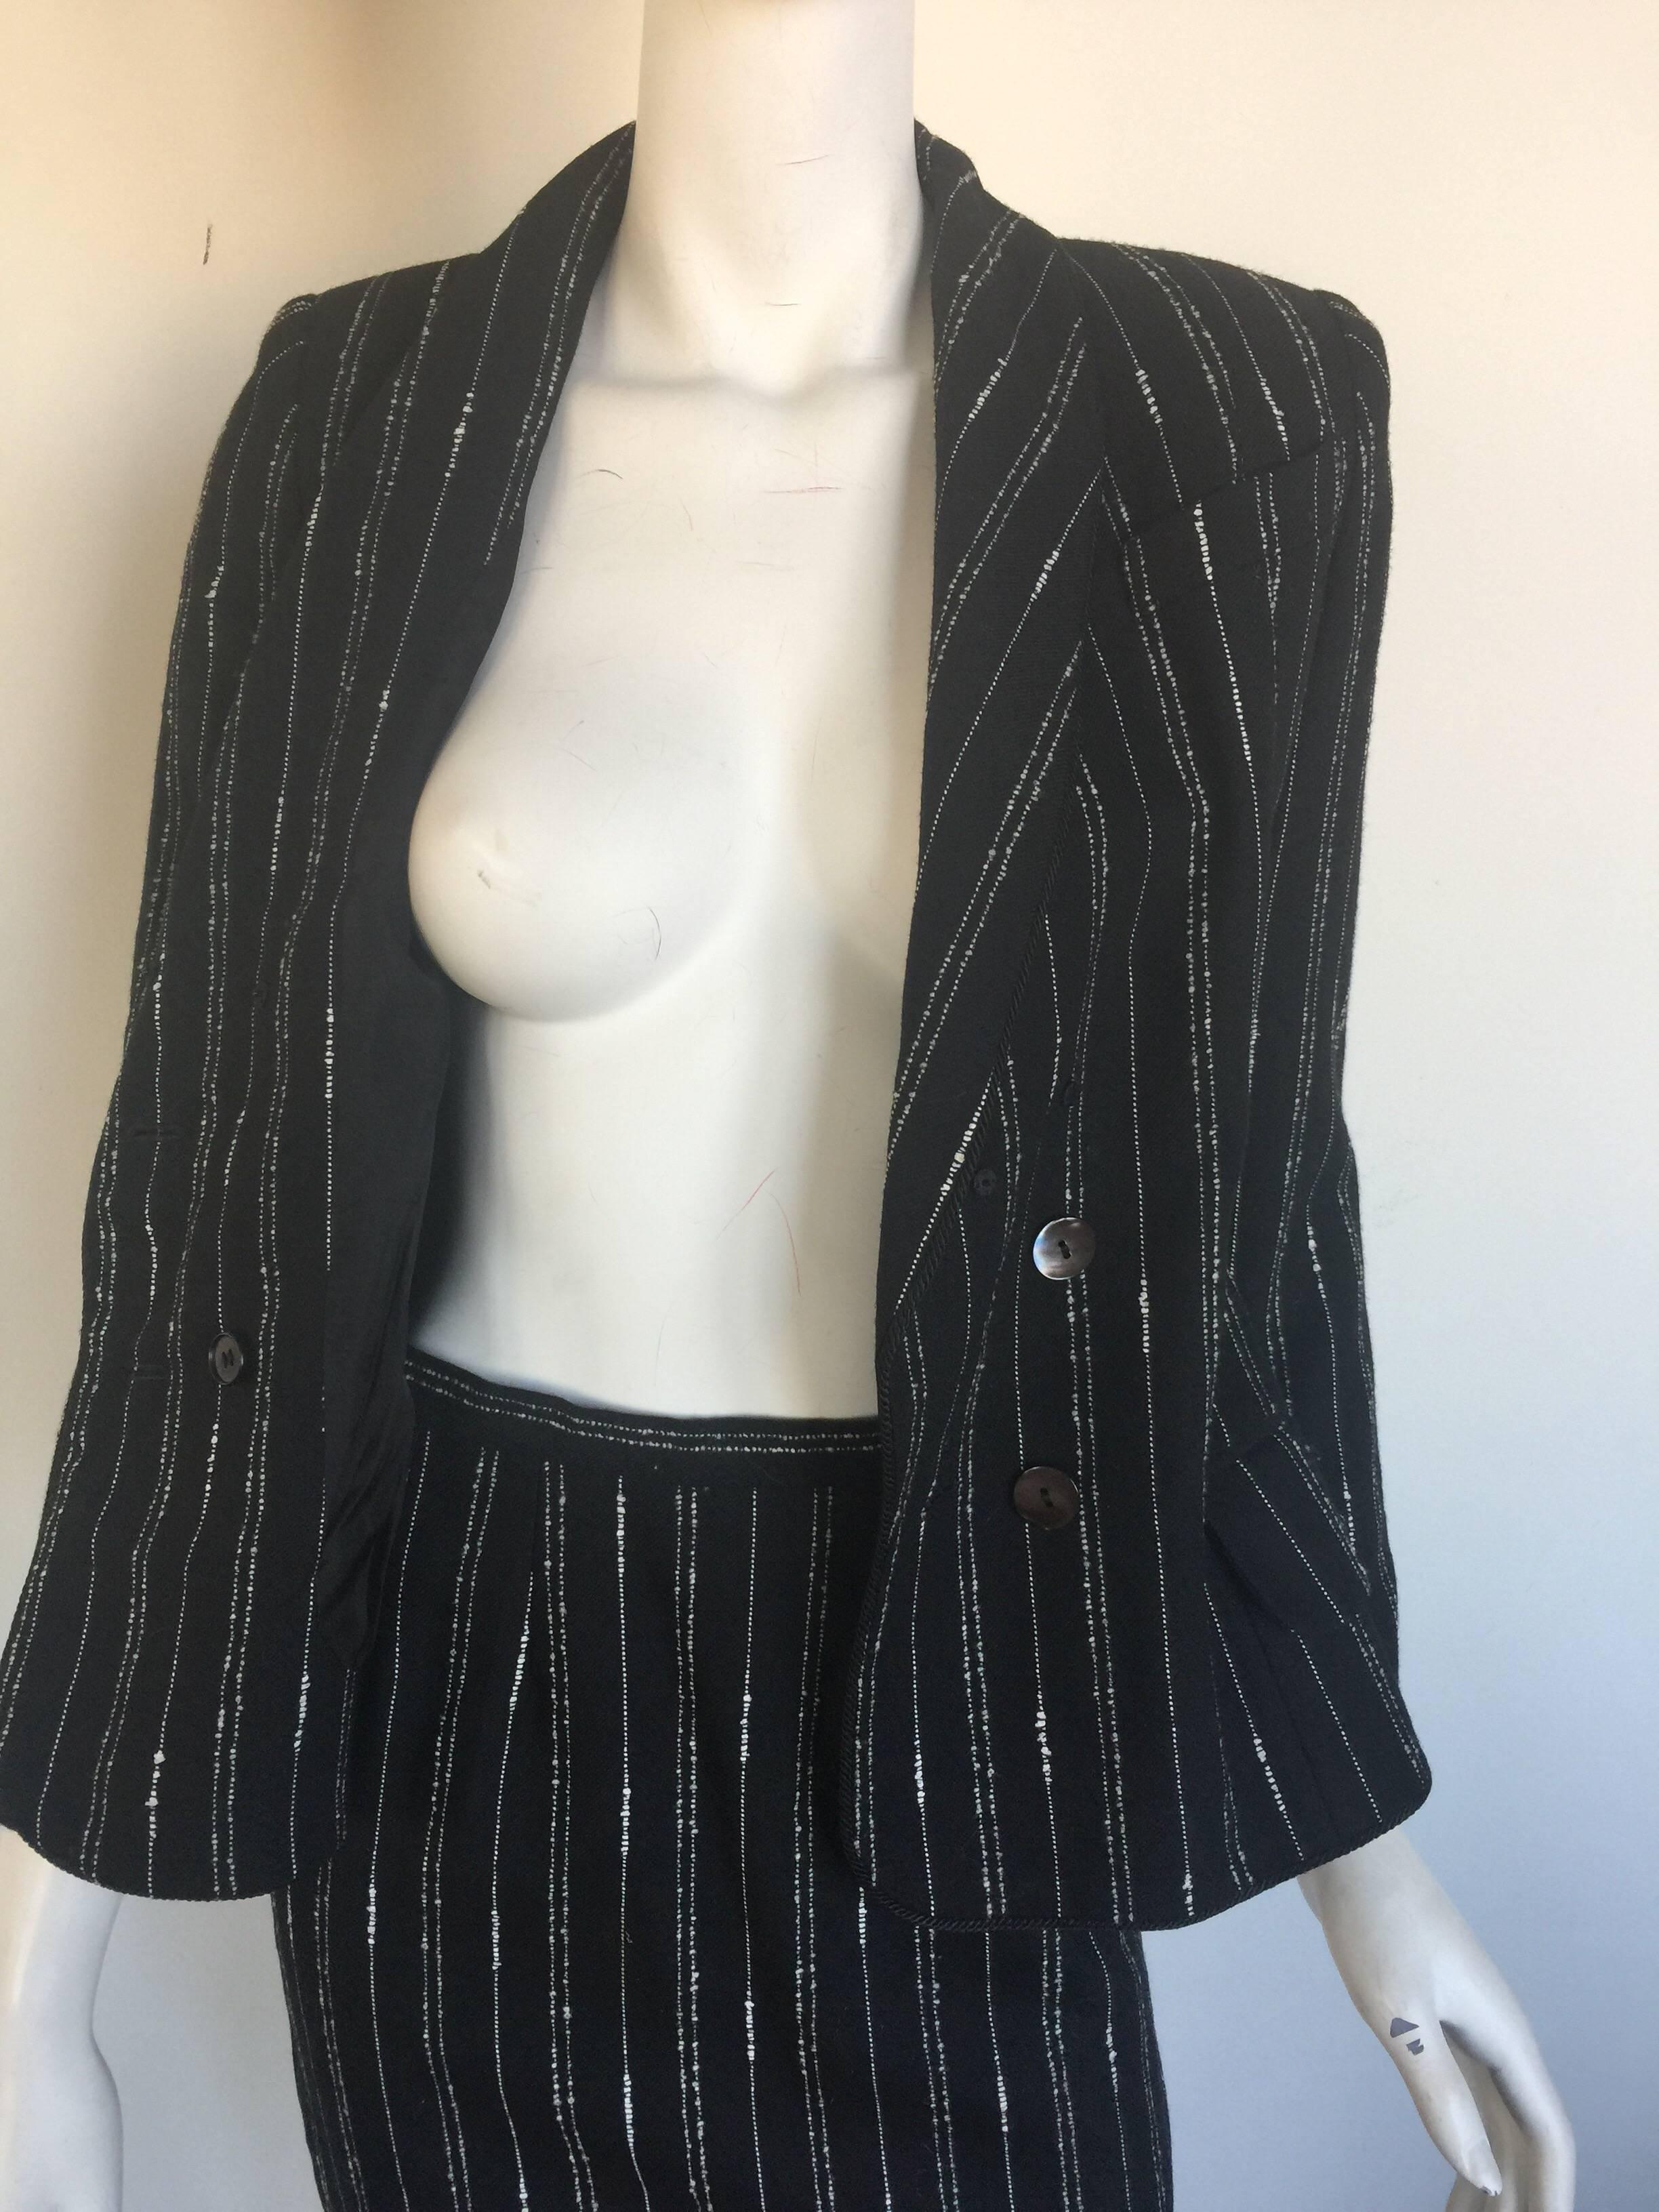 Women's or Men's Givenchy black and white pinstripe skirt suit For Sale